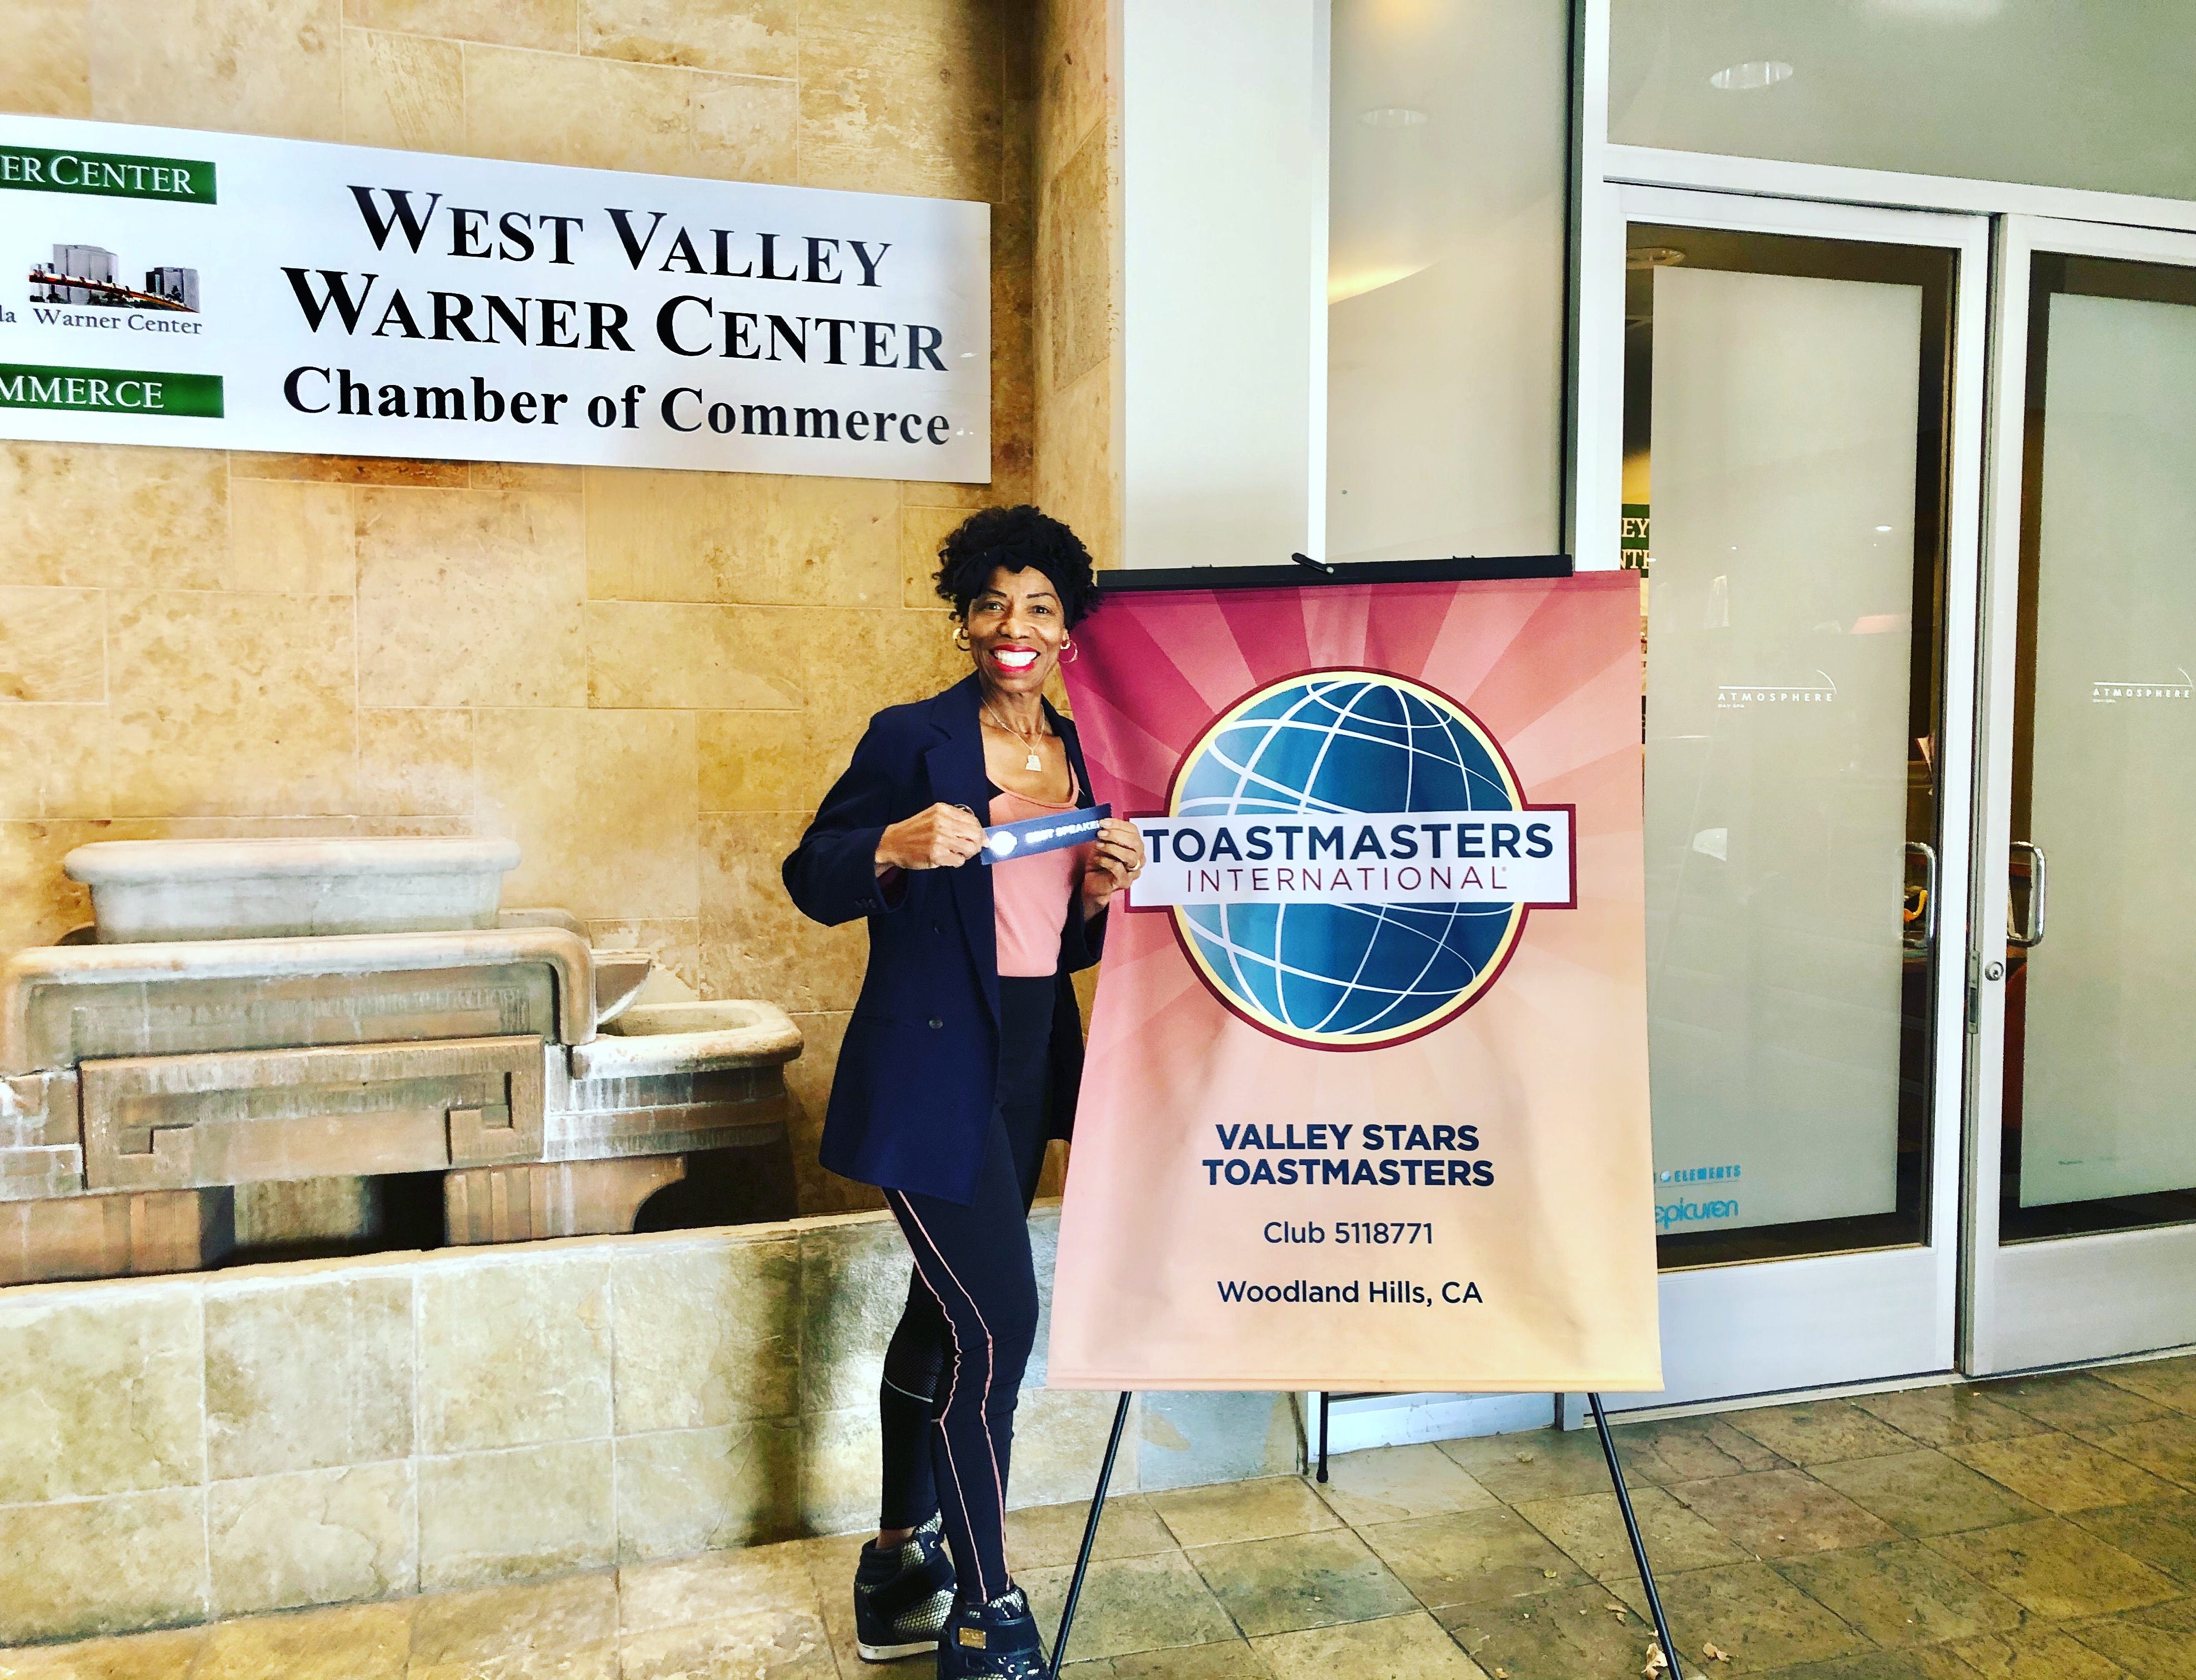 West Valley Warner Center Chamber of Commerce